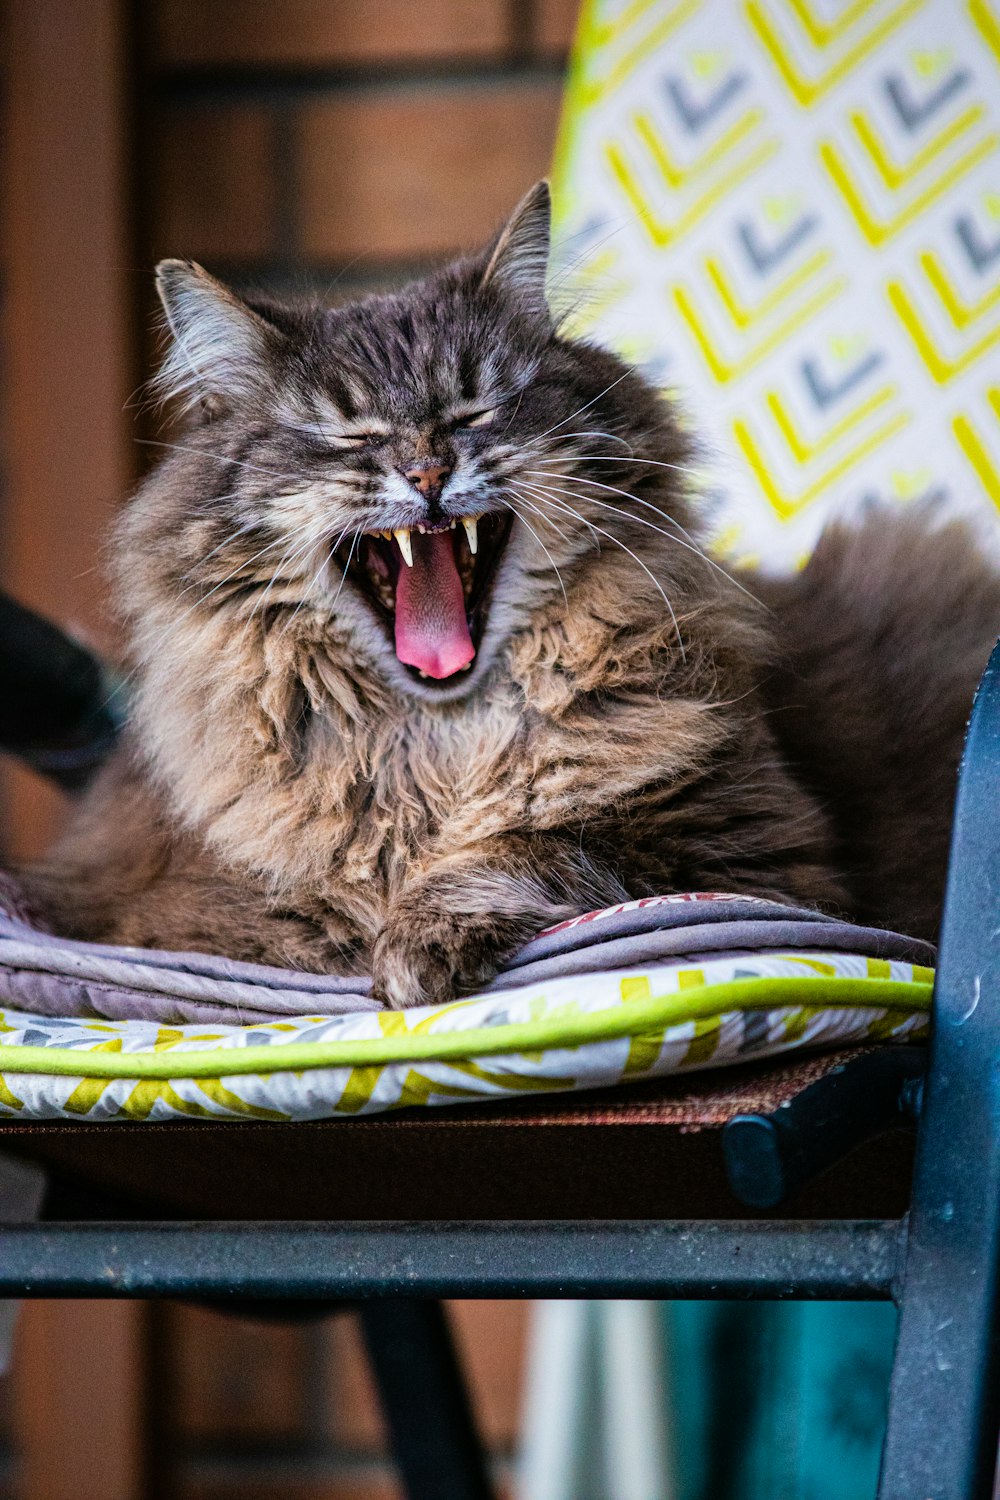 a cat yawns while sitting on a chair